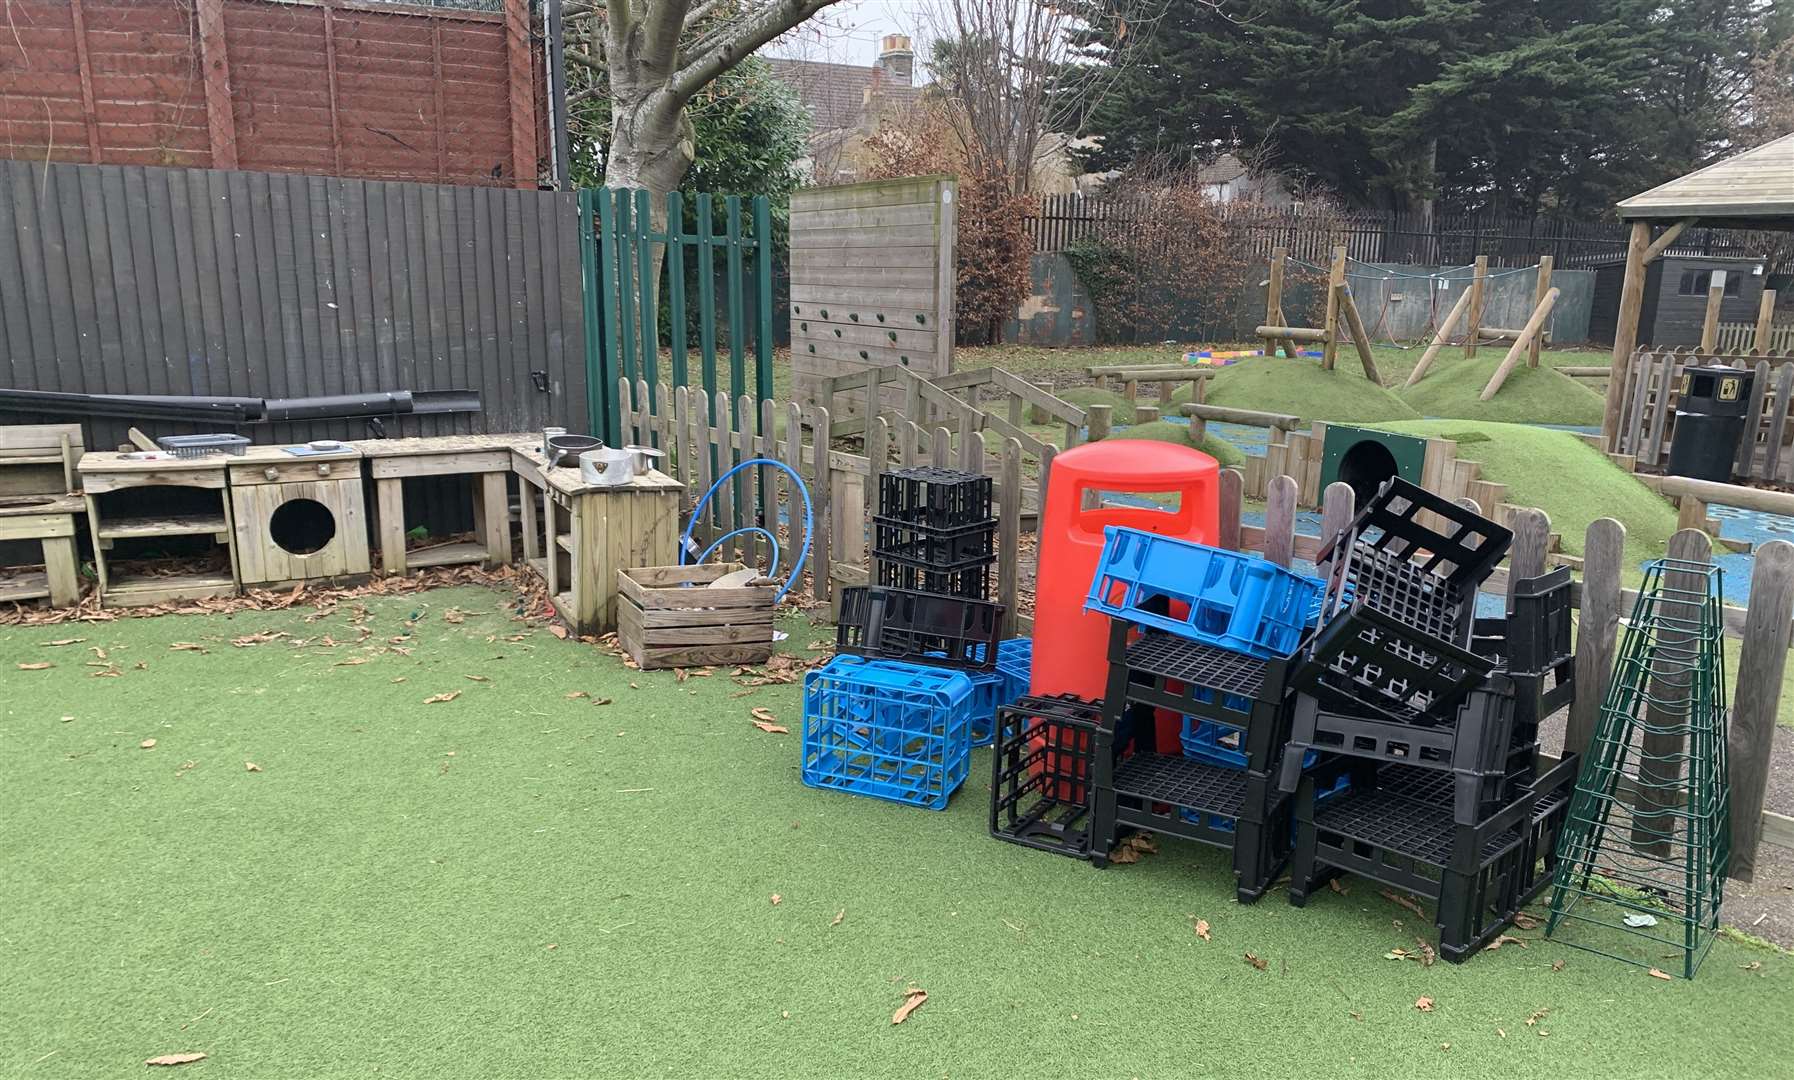 Napier Community Primary and Nursery Academy, in Napier Road, Gillingham is looking for volunteers and resources to improve their outdoor learning area